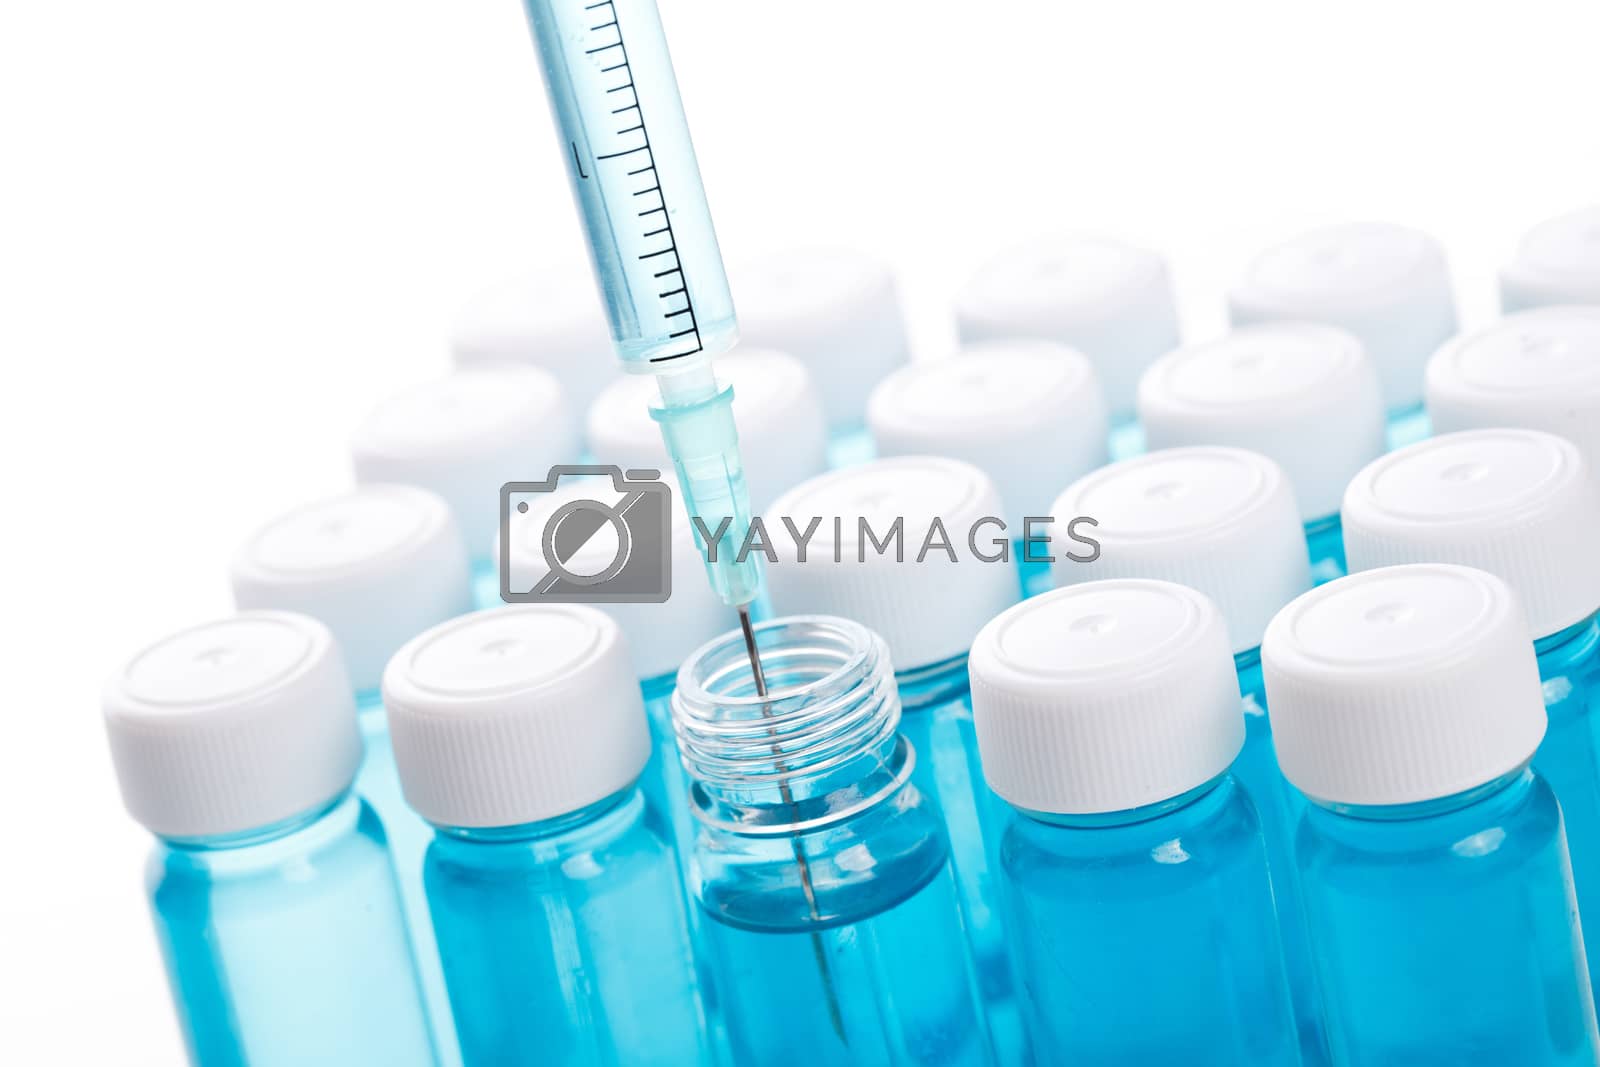 Royalty free image of Vial with vaccine by rufatjumali